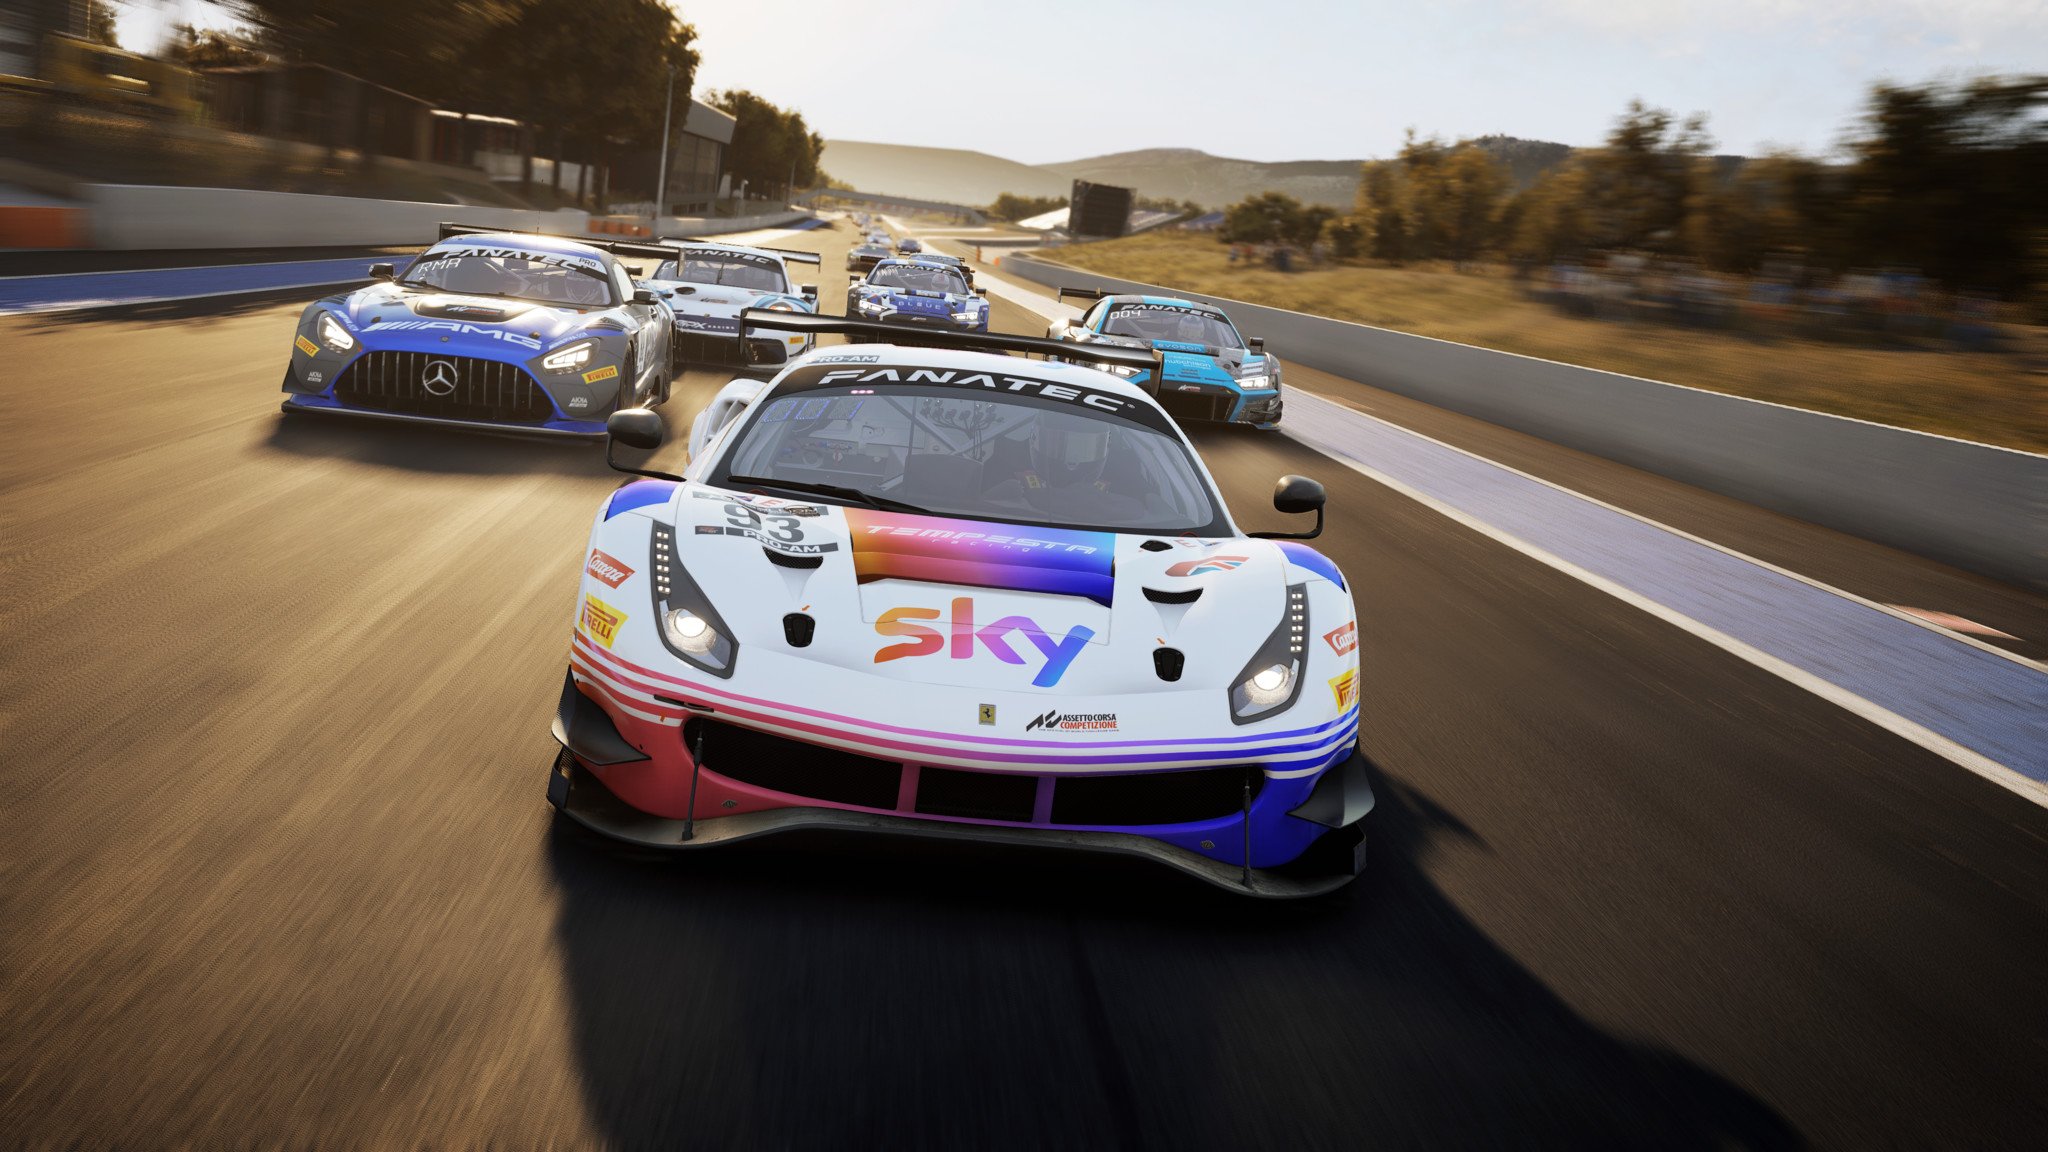 Assetto Corsa Competizione Console Crossplay Now Available For PS5